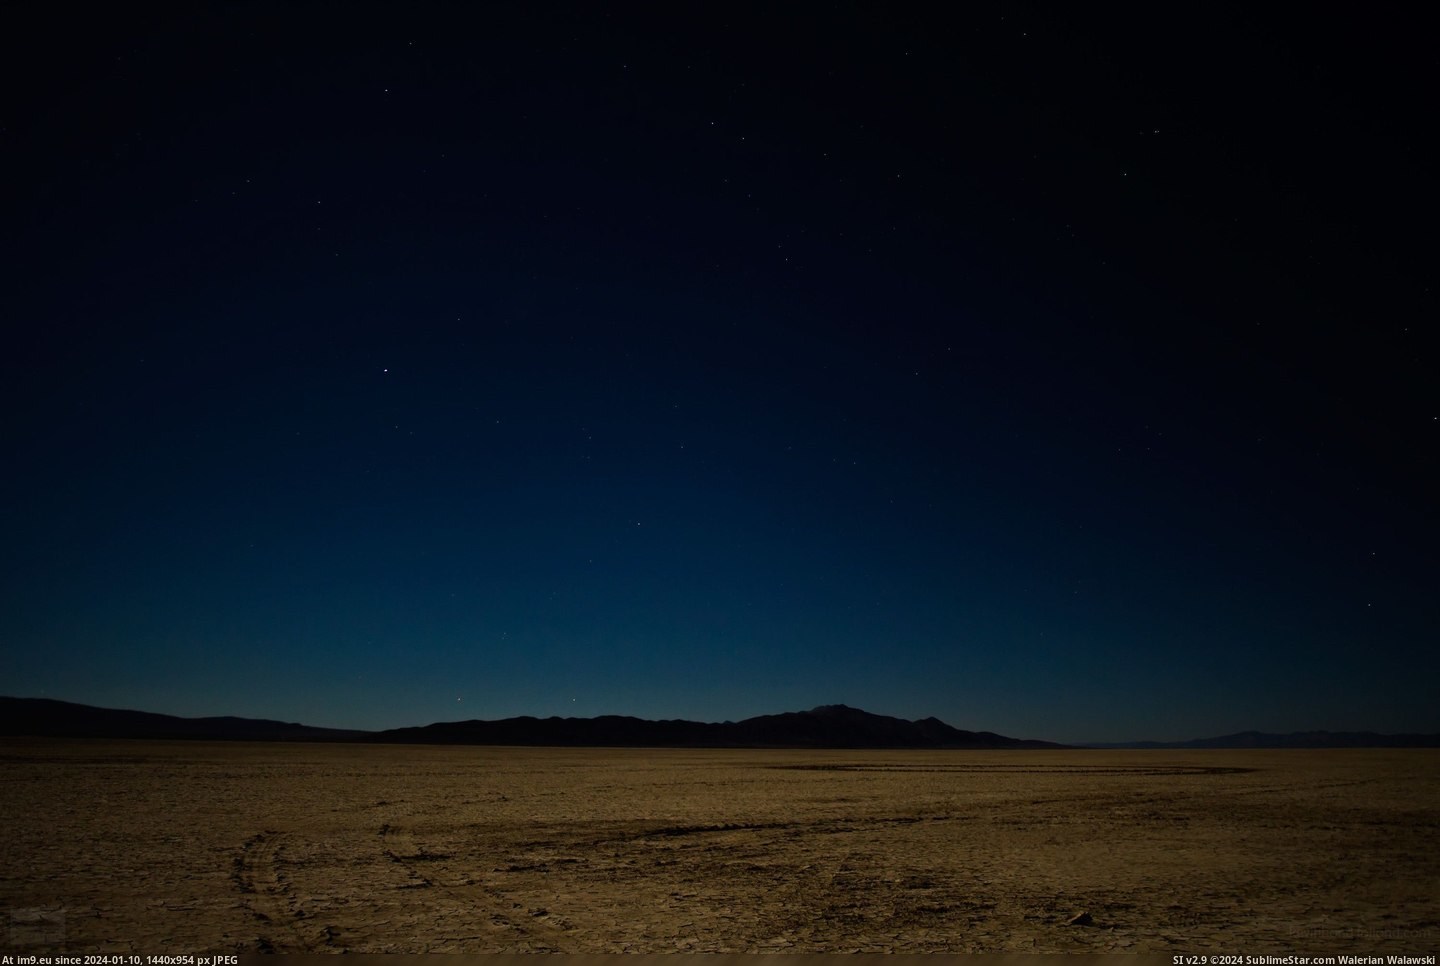 #Black #Man #Rock #Nevada #Burning #3000x2000 #Place #Desert #Lonely [Earthporn] When Burning Man is gone, Nevada's Black Rock Desert is a lonely place [3000x2000] [OC] Pic. (Изображение из альбом My r/EARTHPORN favs))